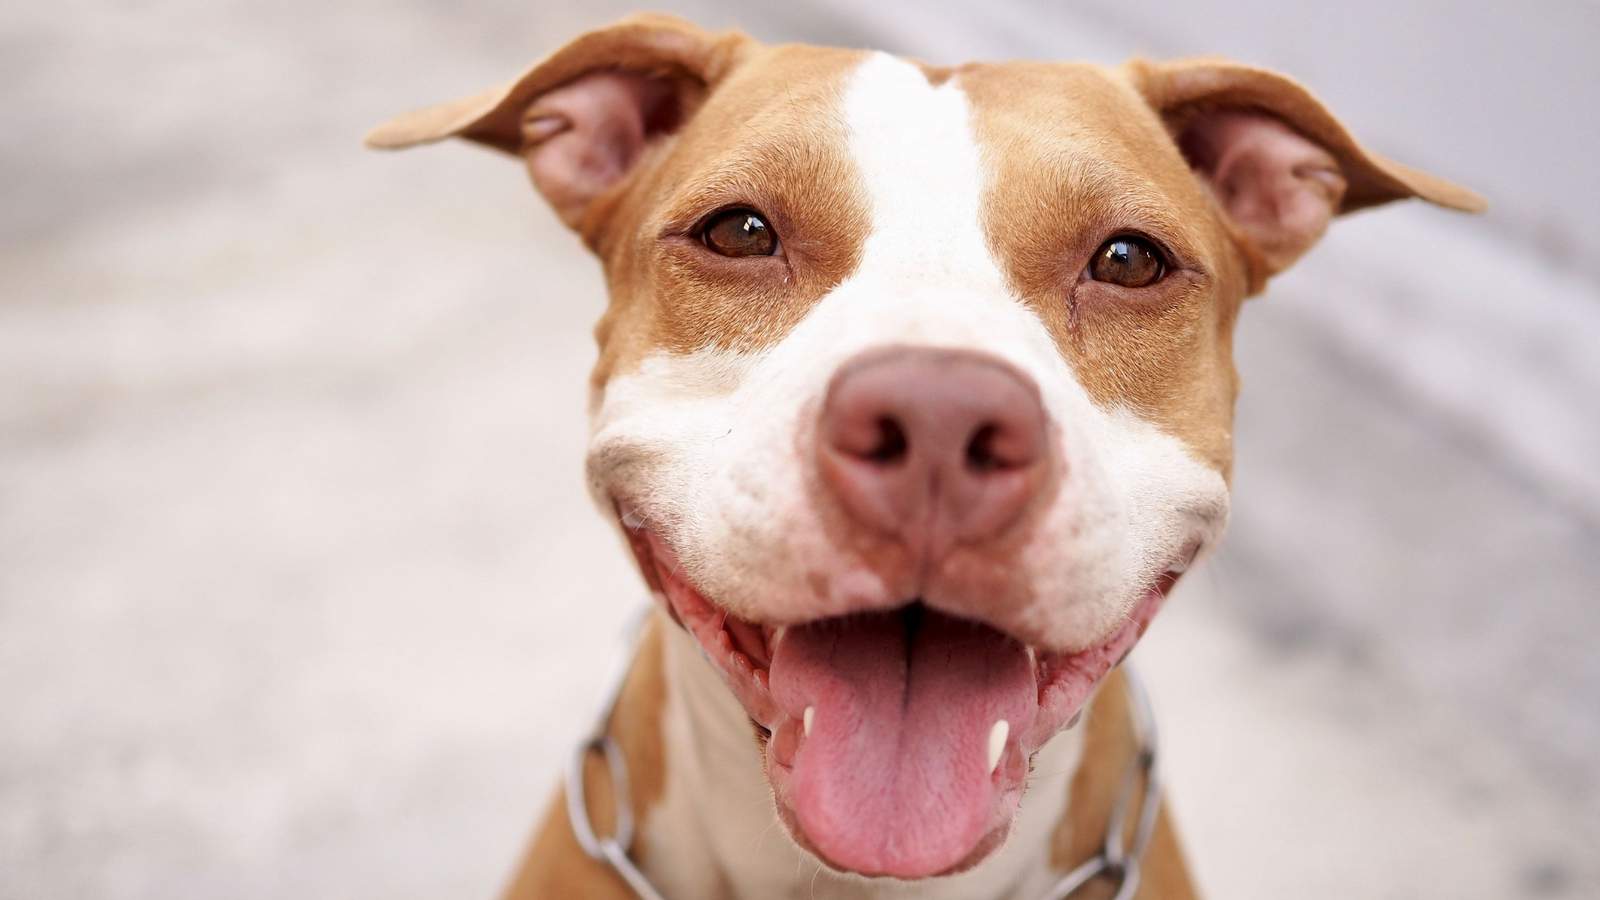 Celebrate ‘St. Pitty’s Day’ by taking home your forever friend